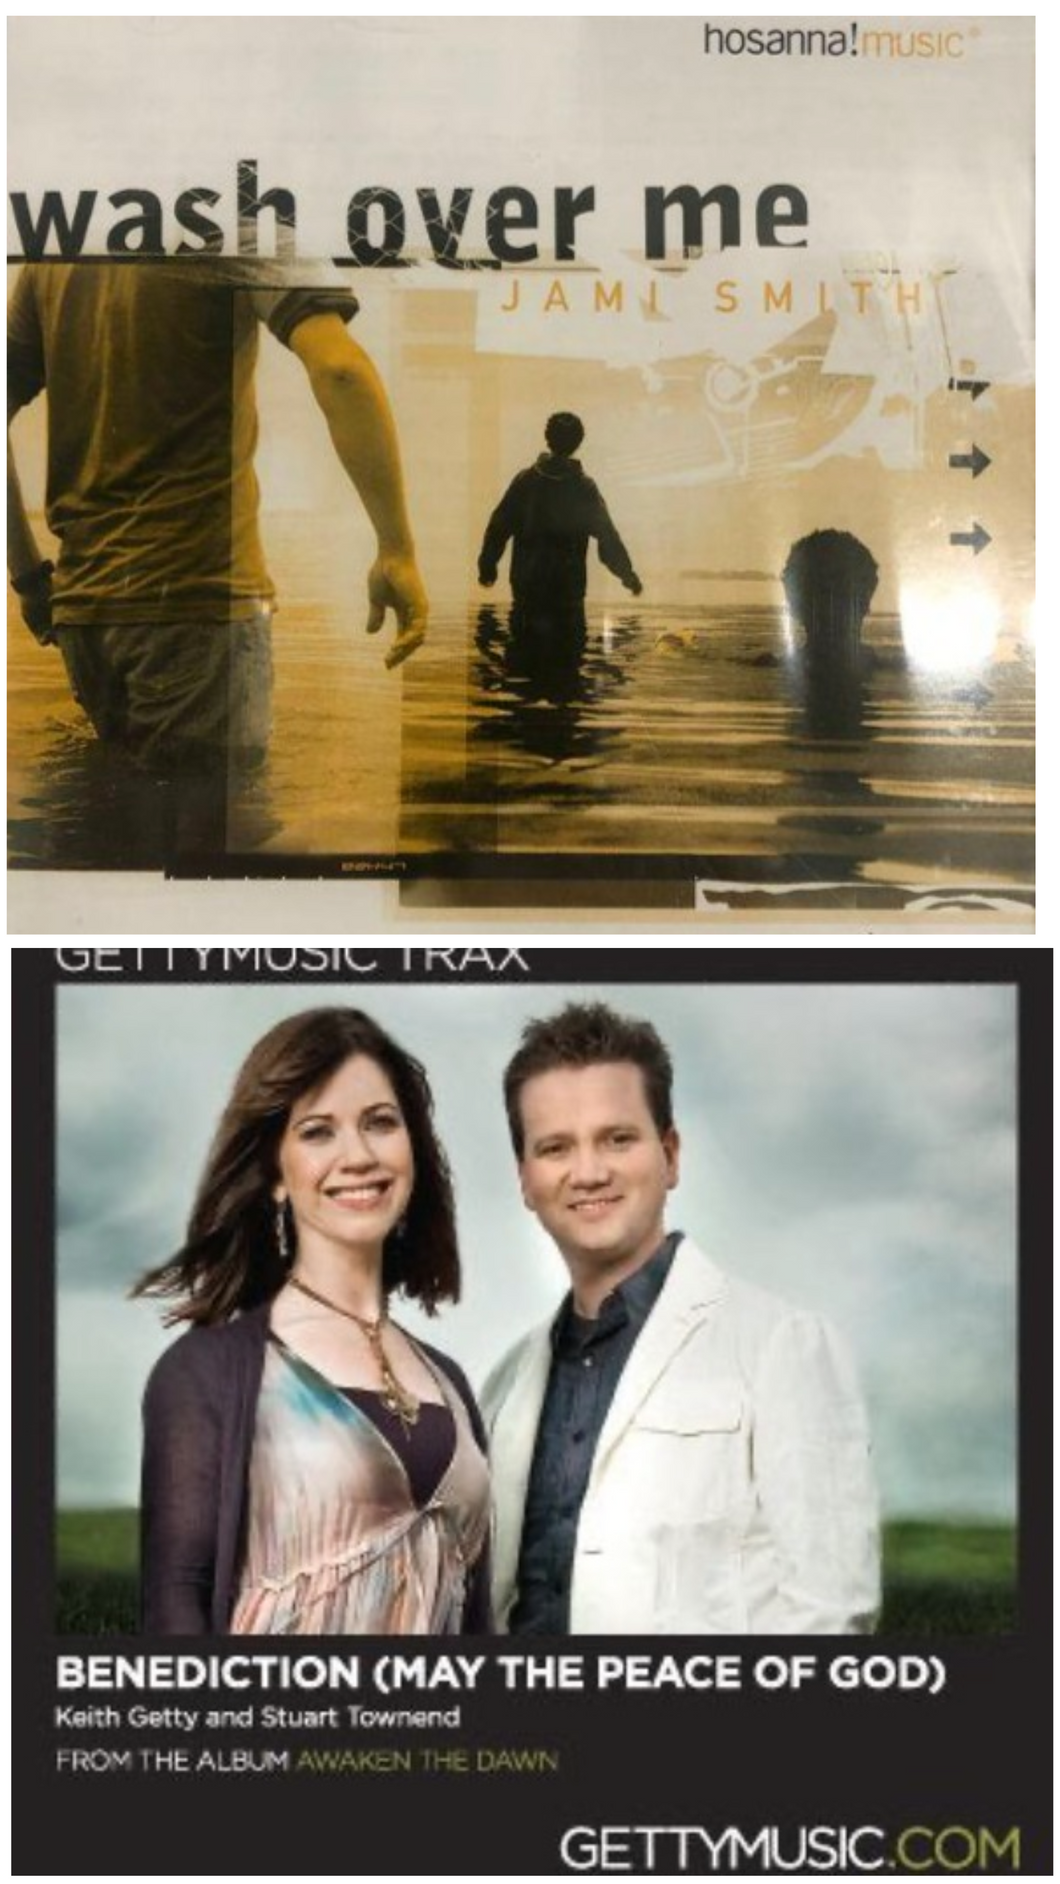 Jami Smith Wash Over Me Split-Trax + Keith Getty Benediction (May the Peace of God) 2CD